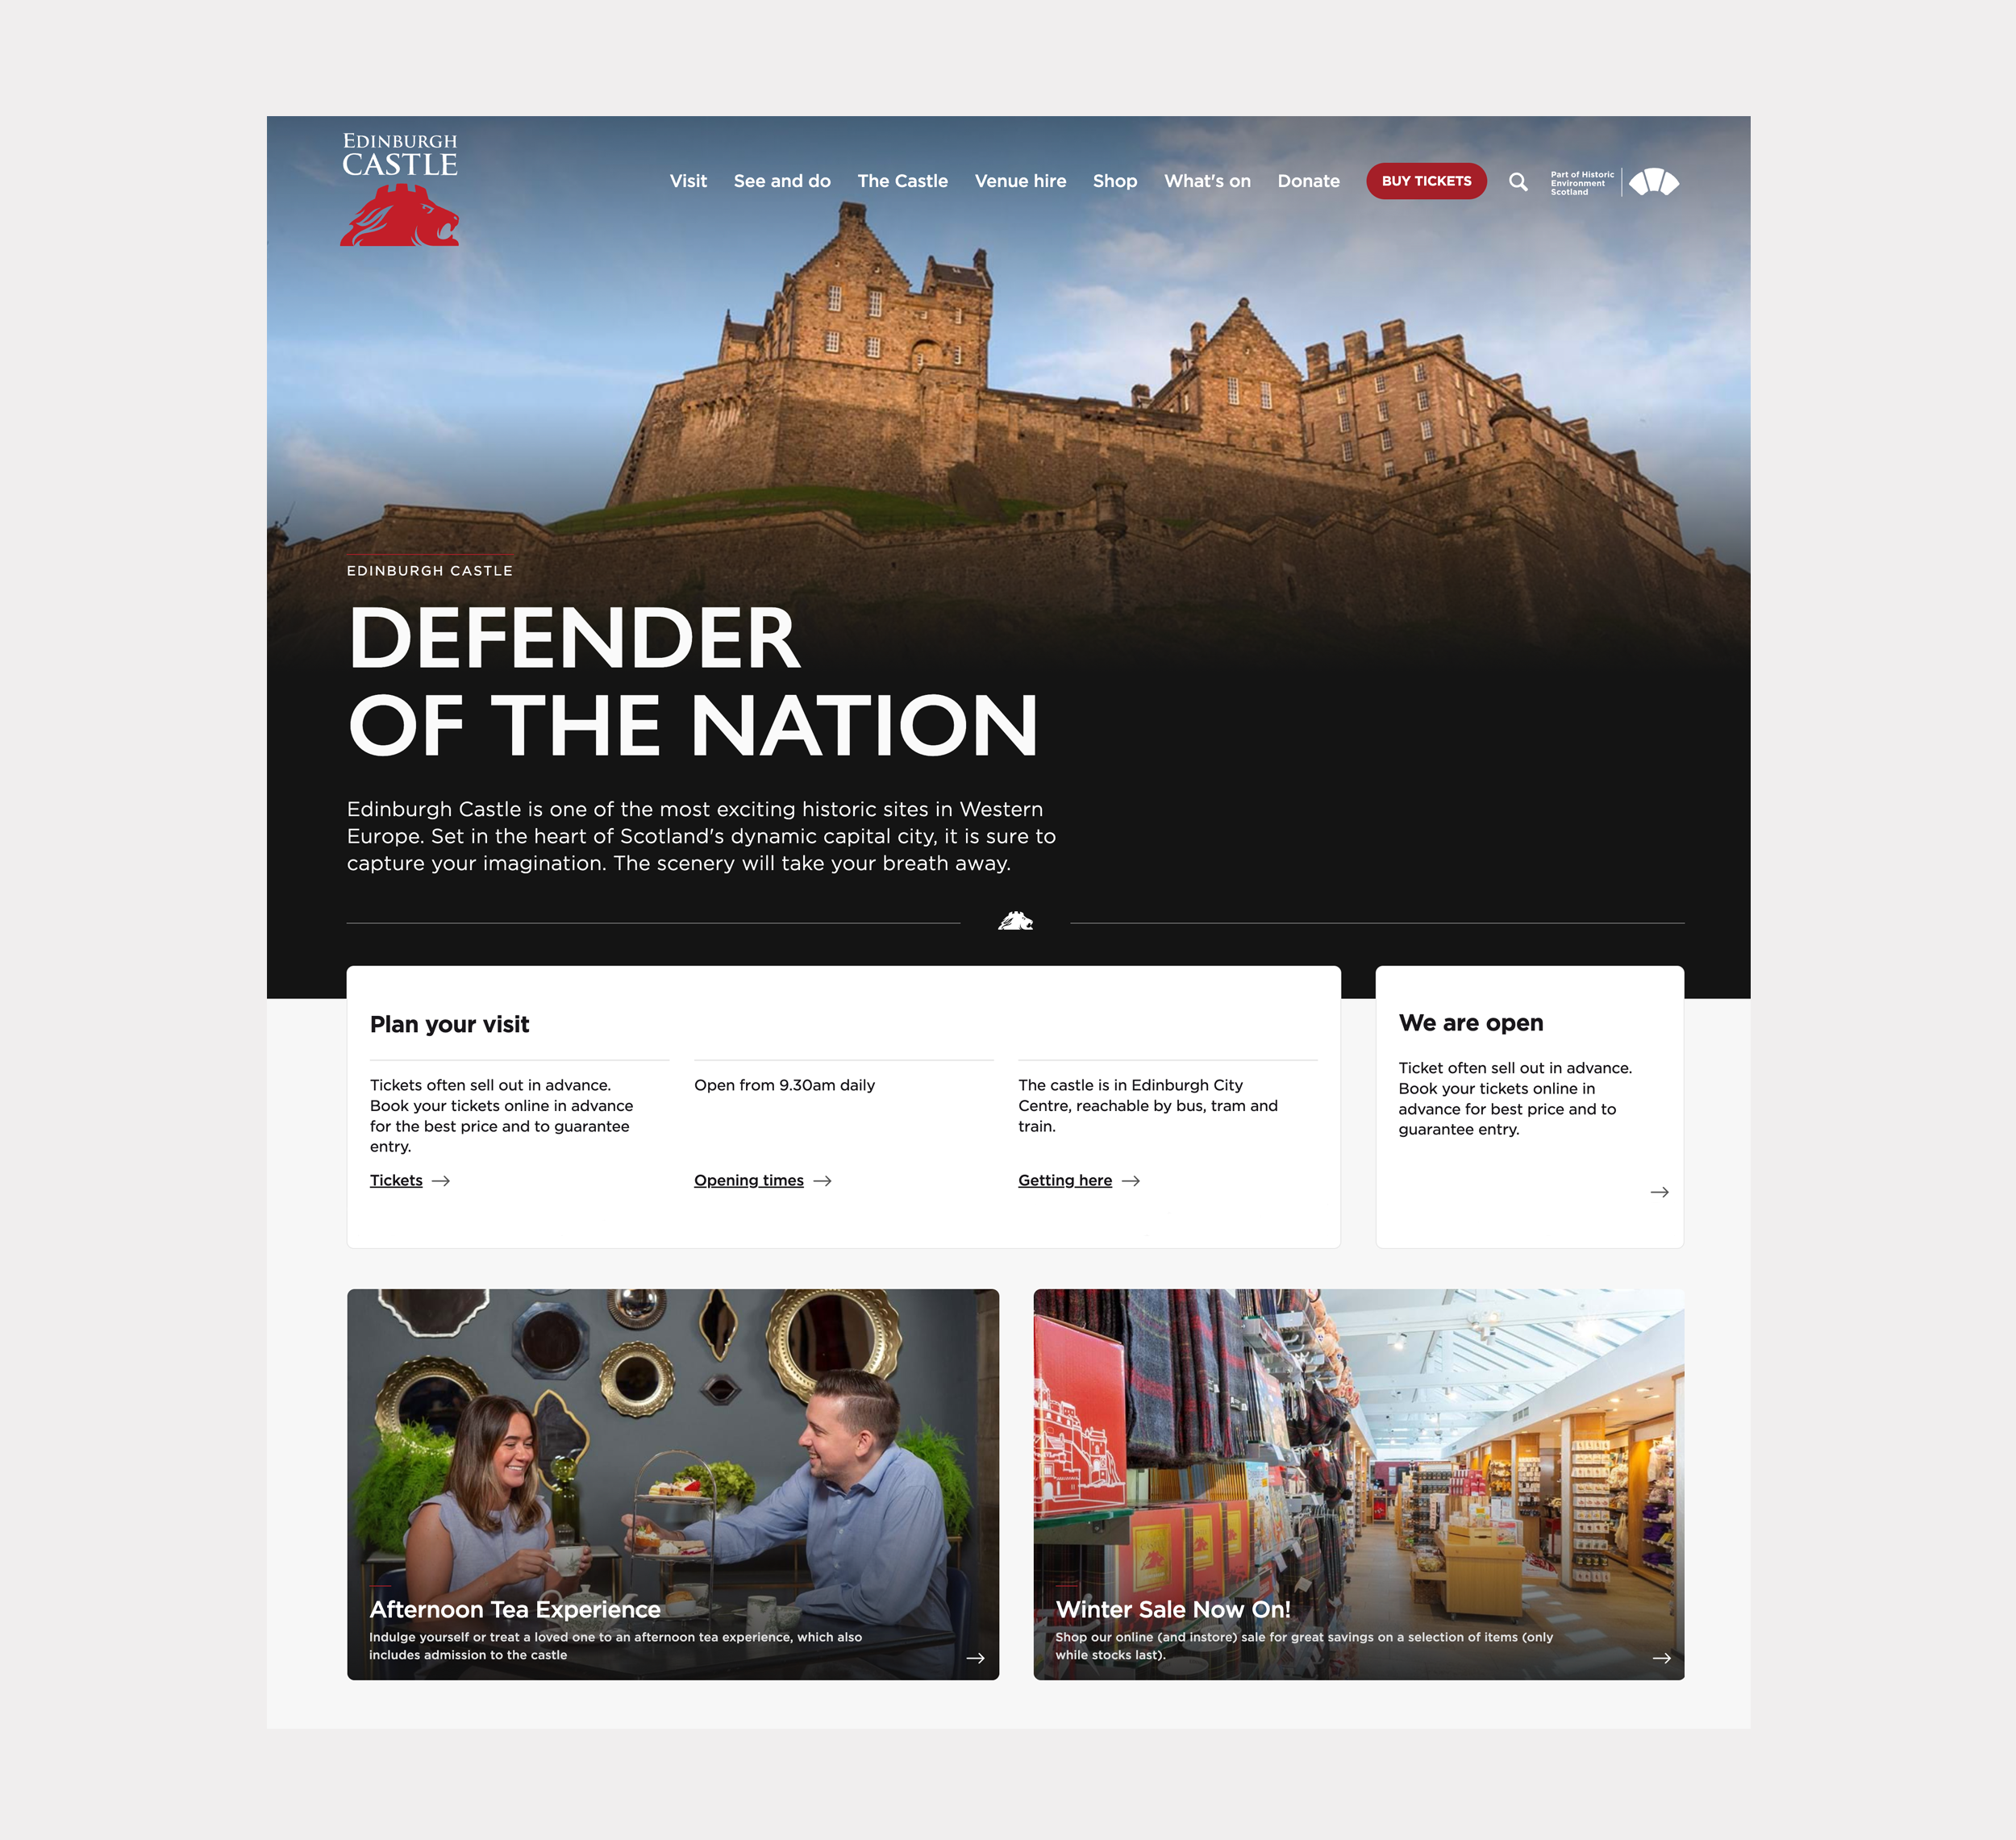 Large screen view showing the home page of the Edinburgh Castle website